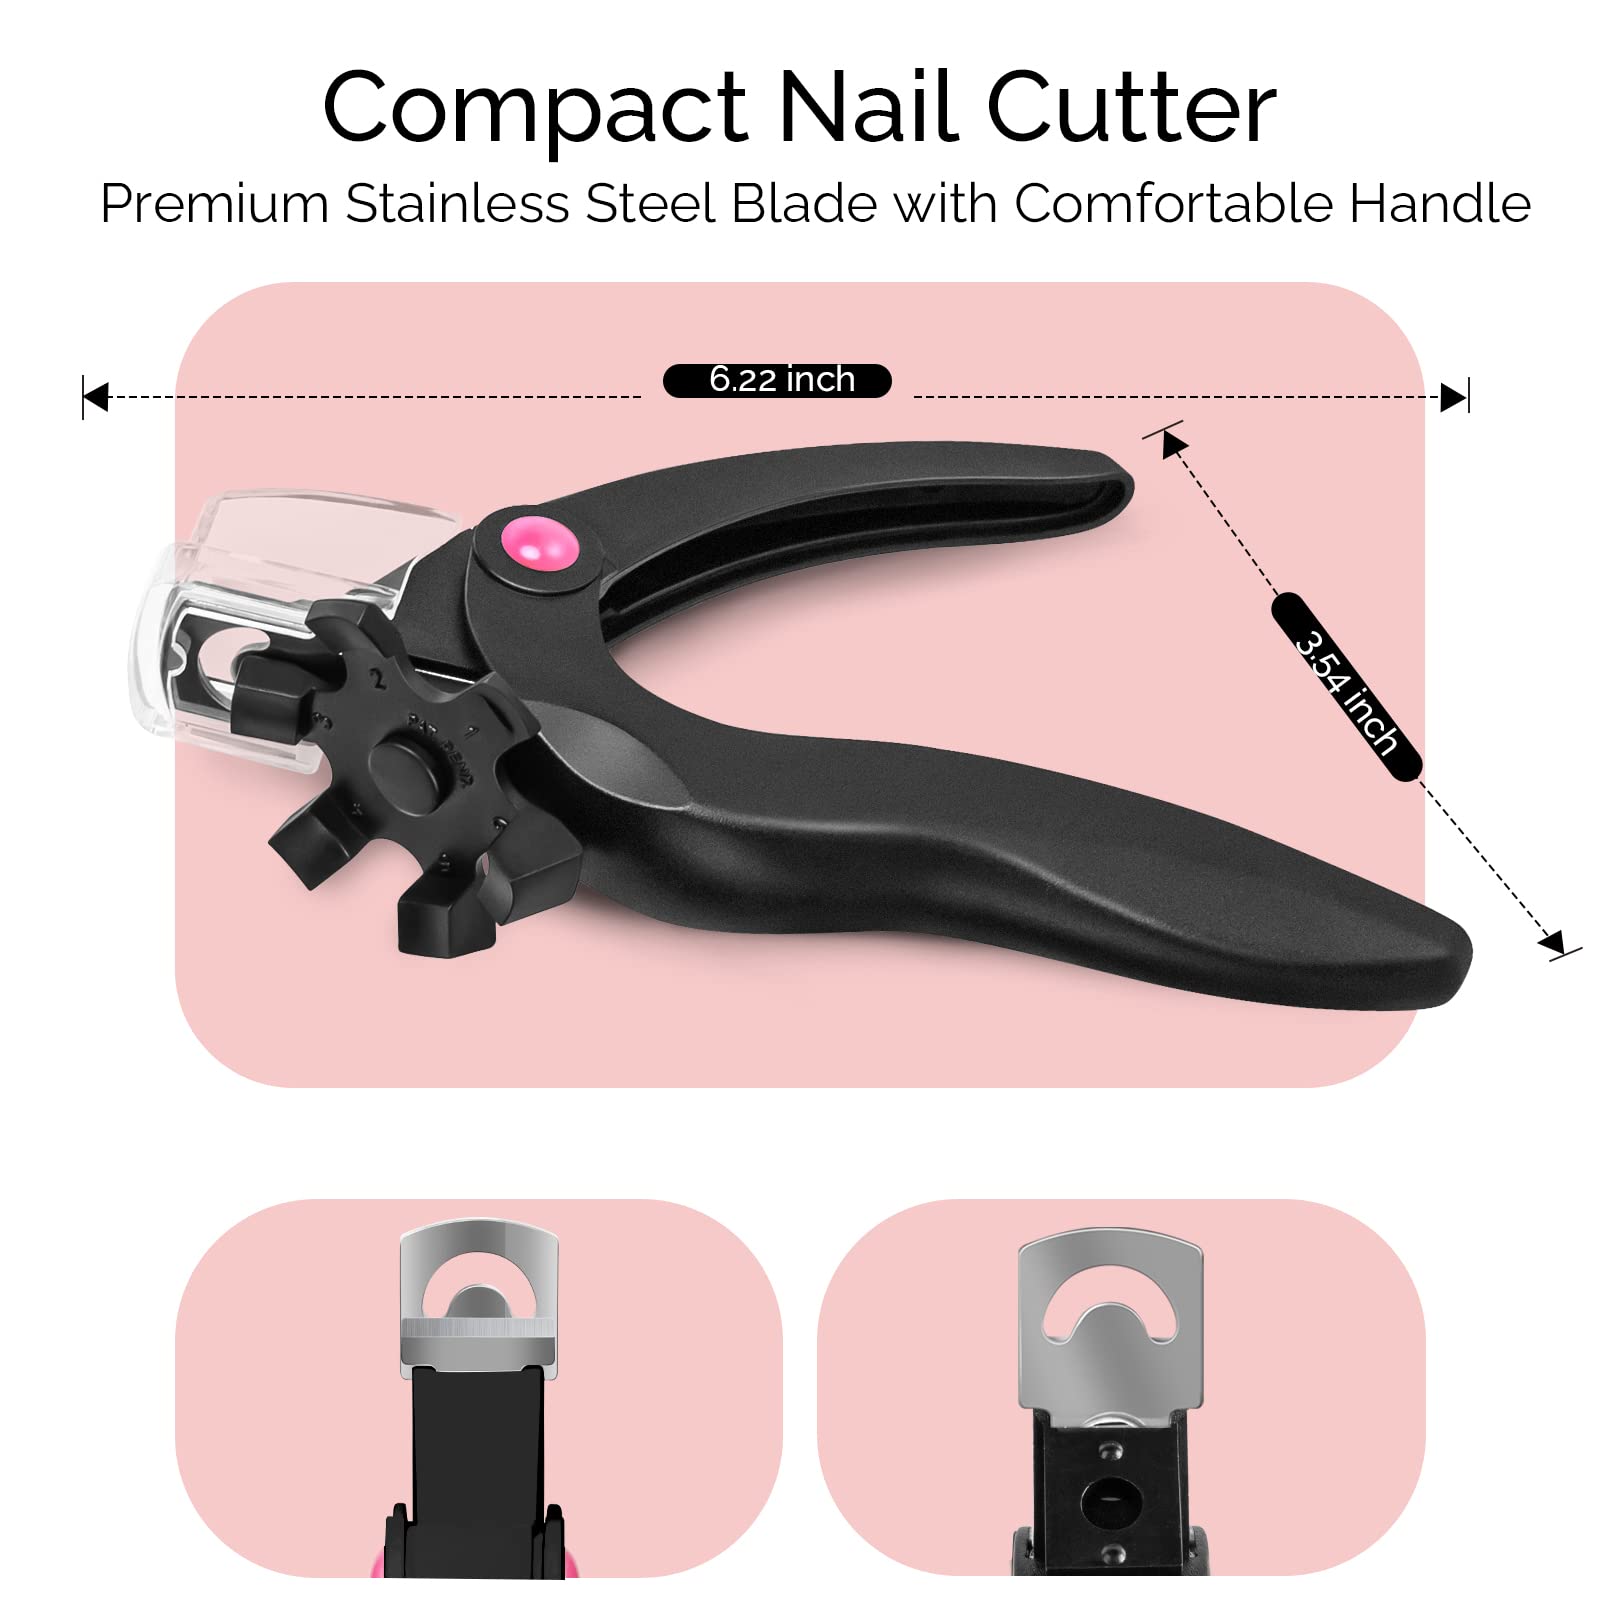 Stainless Steel Edge Cutter professional for both home and salon use